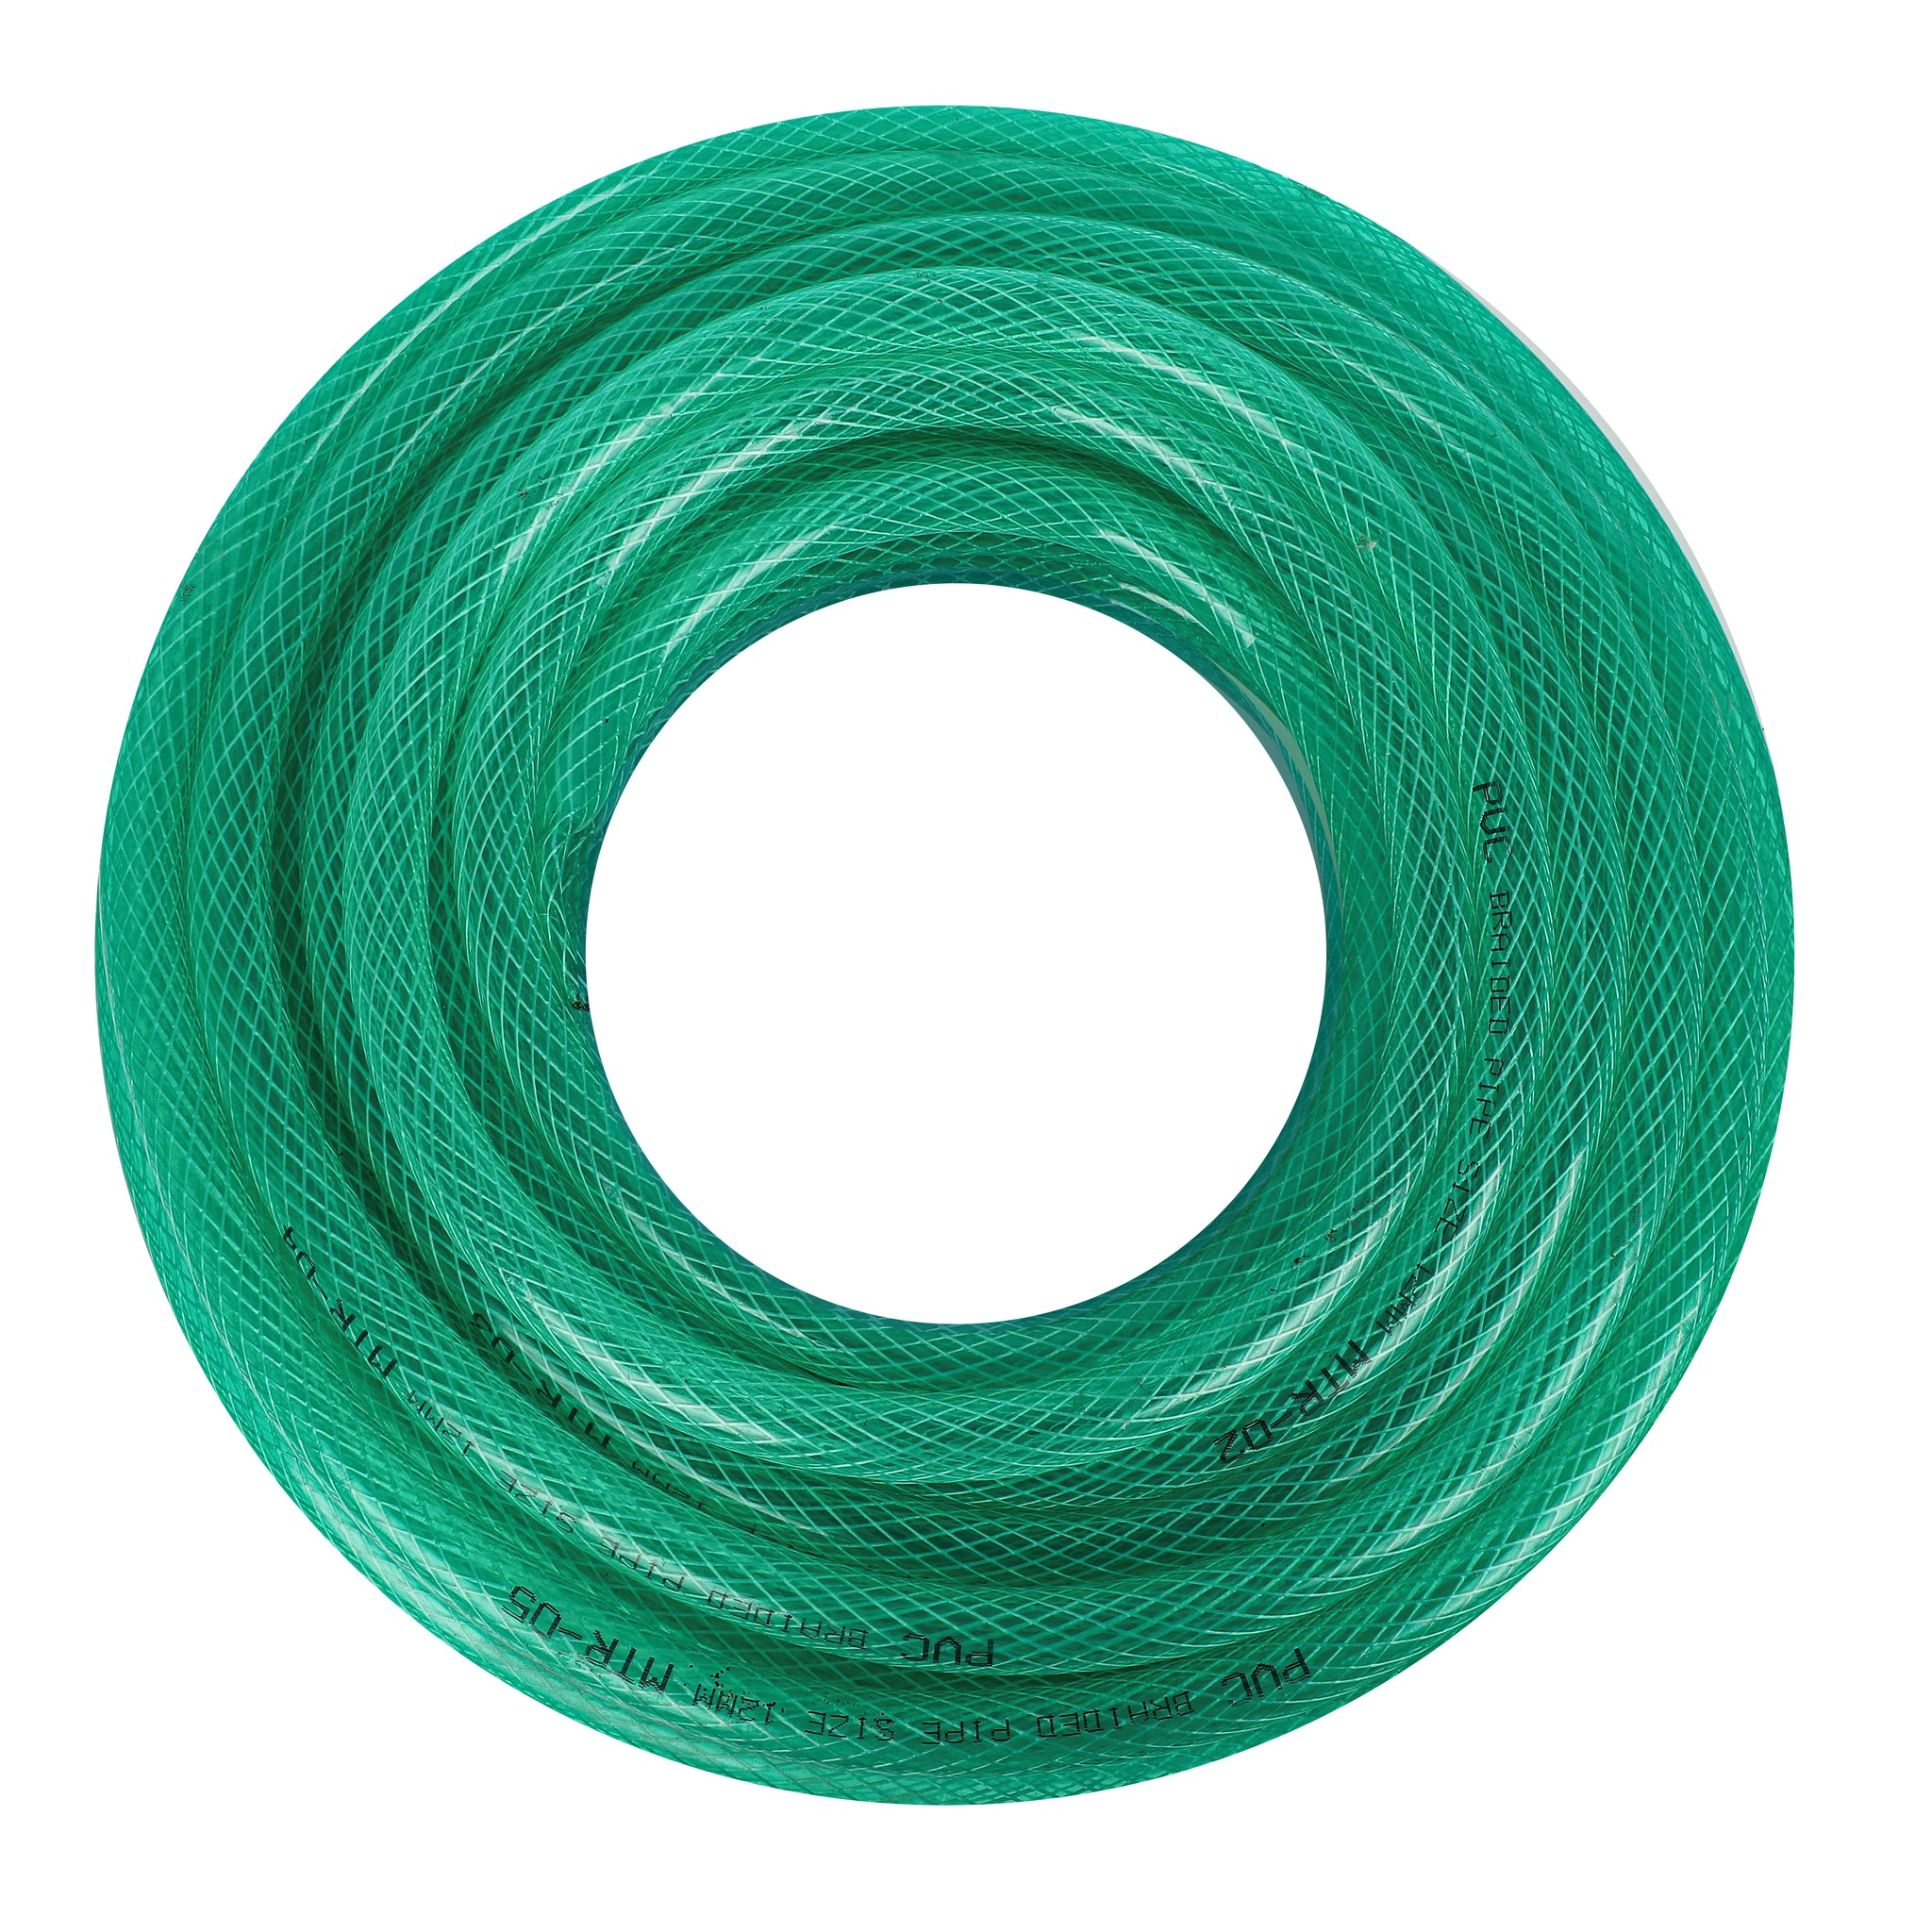 Utkarsh Heavy Duty PVC Braided Water Hose Pipe (Size: 1/2") for Garden, Car Wash, Floor Clean, Pet Bath, Easy to Connect Indoor/Outdoor Use (Multicolour)